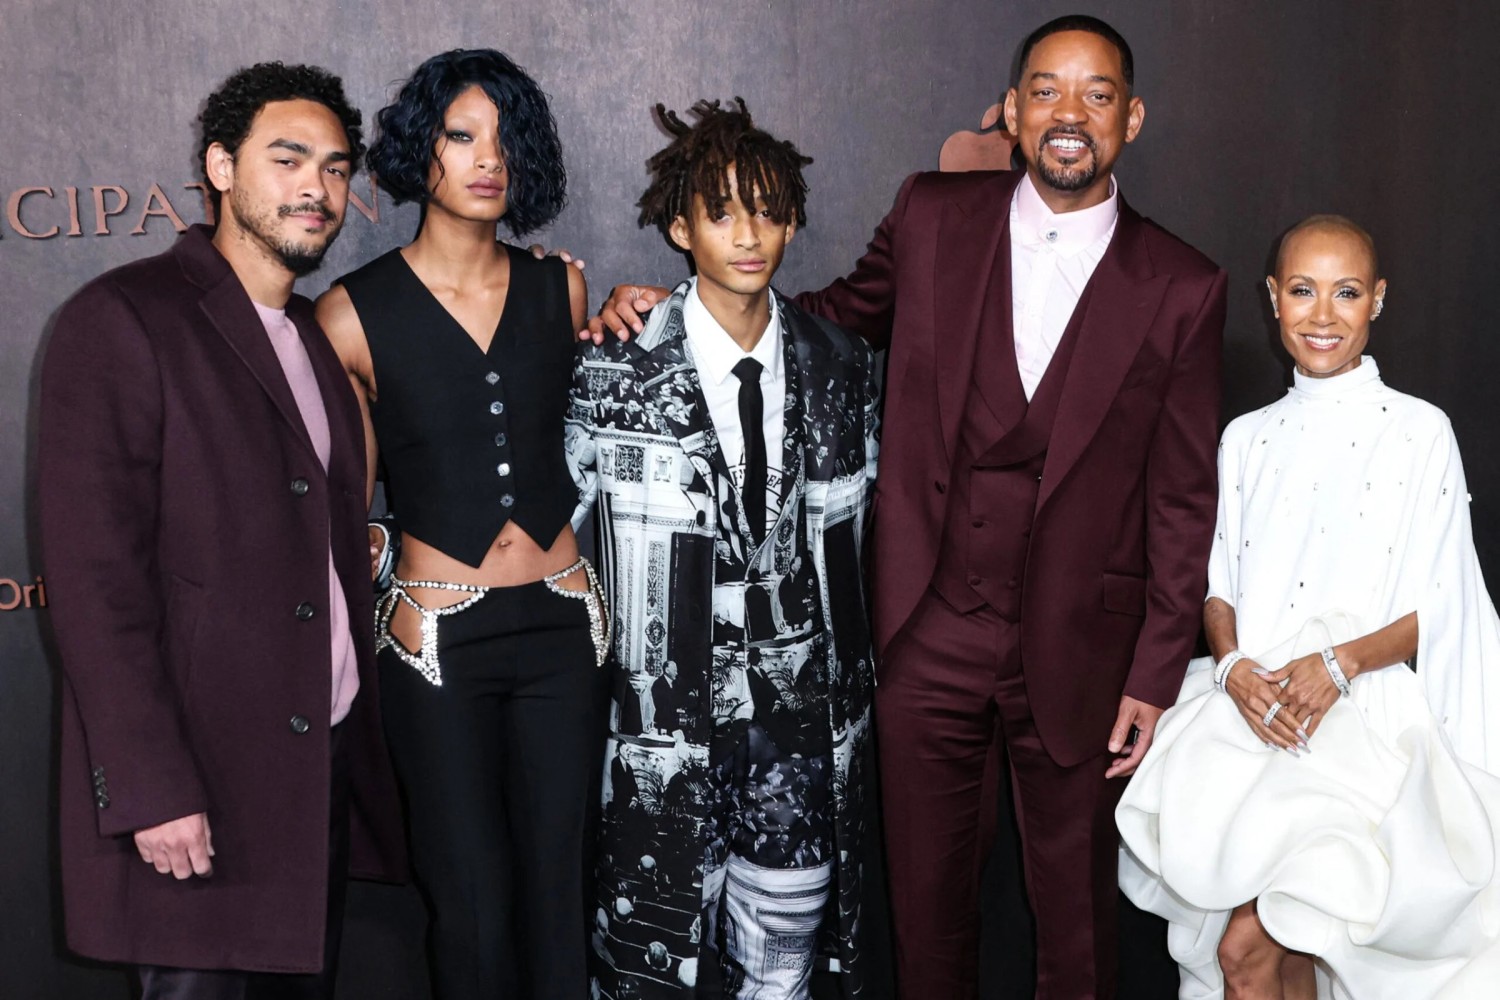 Will Smith Steps Out With Mystery Woman Resembling Jada Pinkett Smith